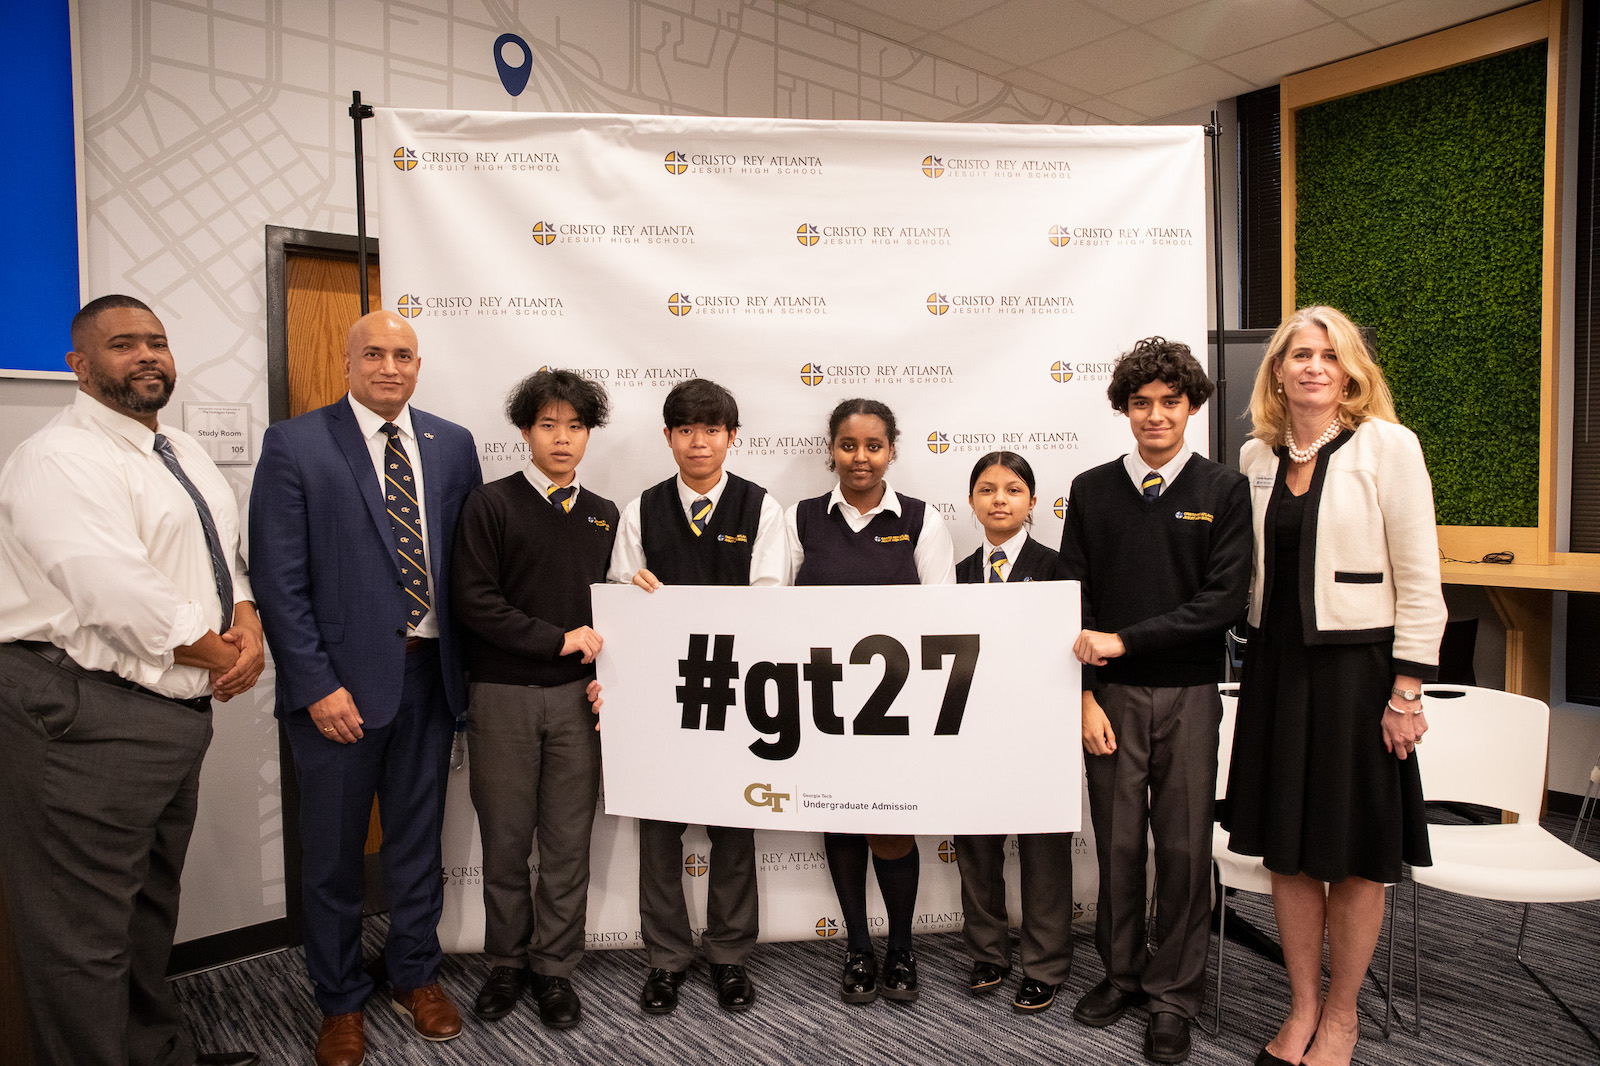 Five students at Cristo Rey Atlanta Jesuit High School were given their acceptance letters by Devesh Ranjan (second from left), the Eugene C. Gwaltney, Jr. School Chair in the Woodruff School of Mechanical Engineering. Photo taken by Ian Sargent.  